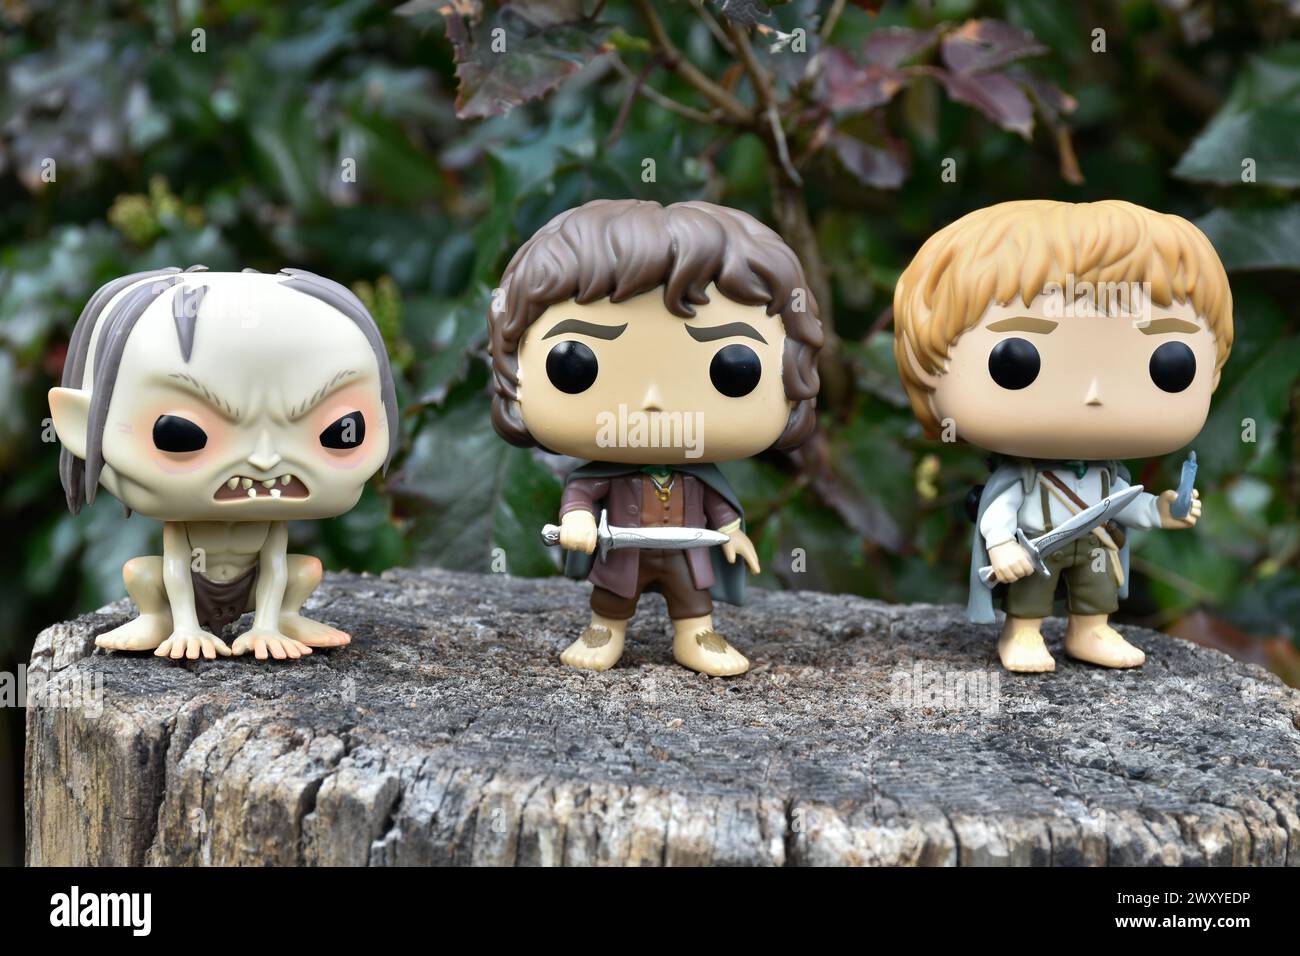 Funko Pop action figures of Gollum, Frodo and Sam hobbits from fantasy movie The Lord of the Rings. Dark forest, tree stump, green leaves. Stock Photo